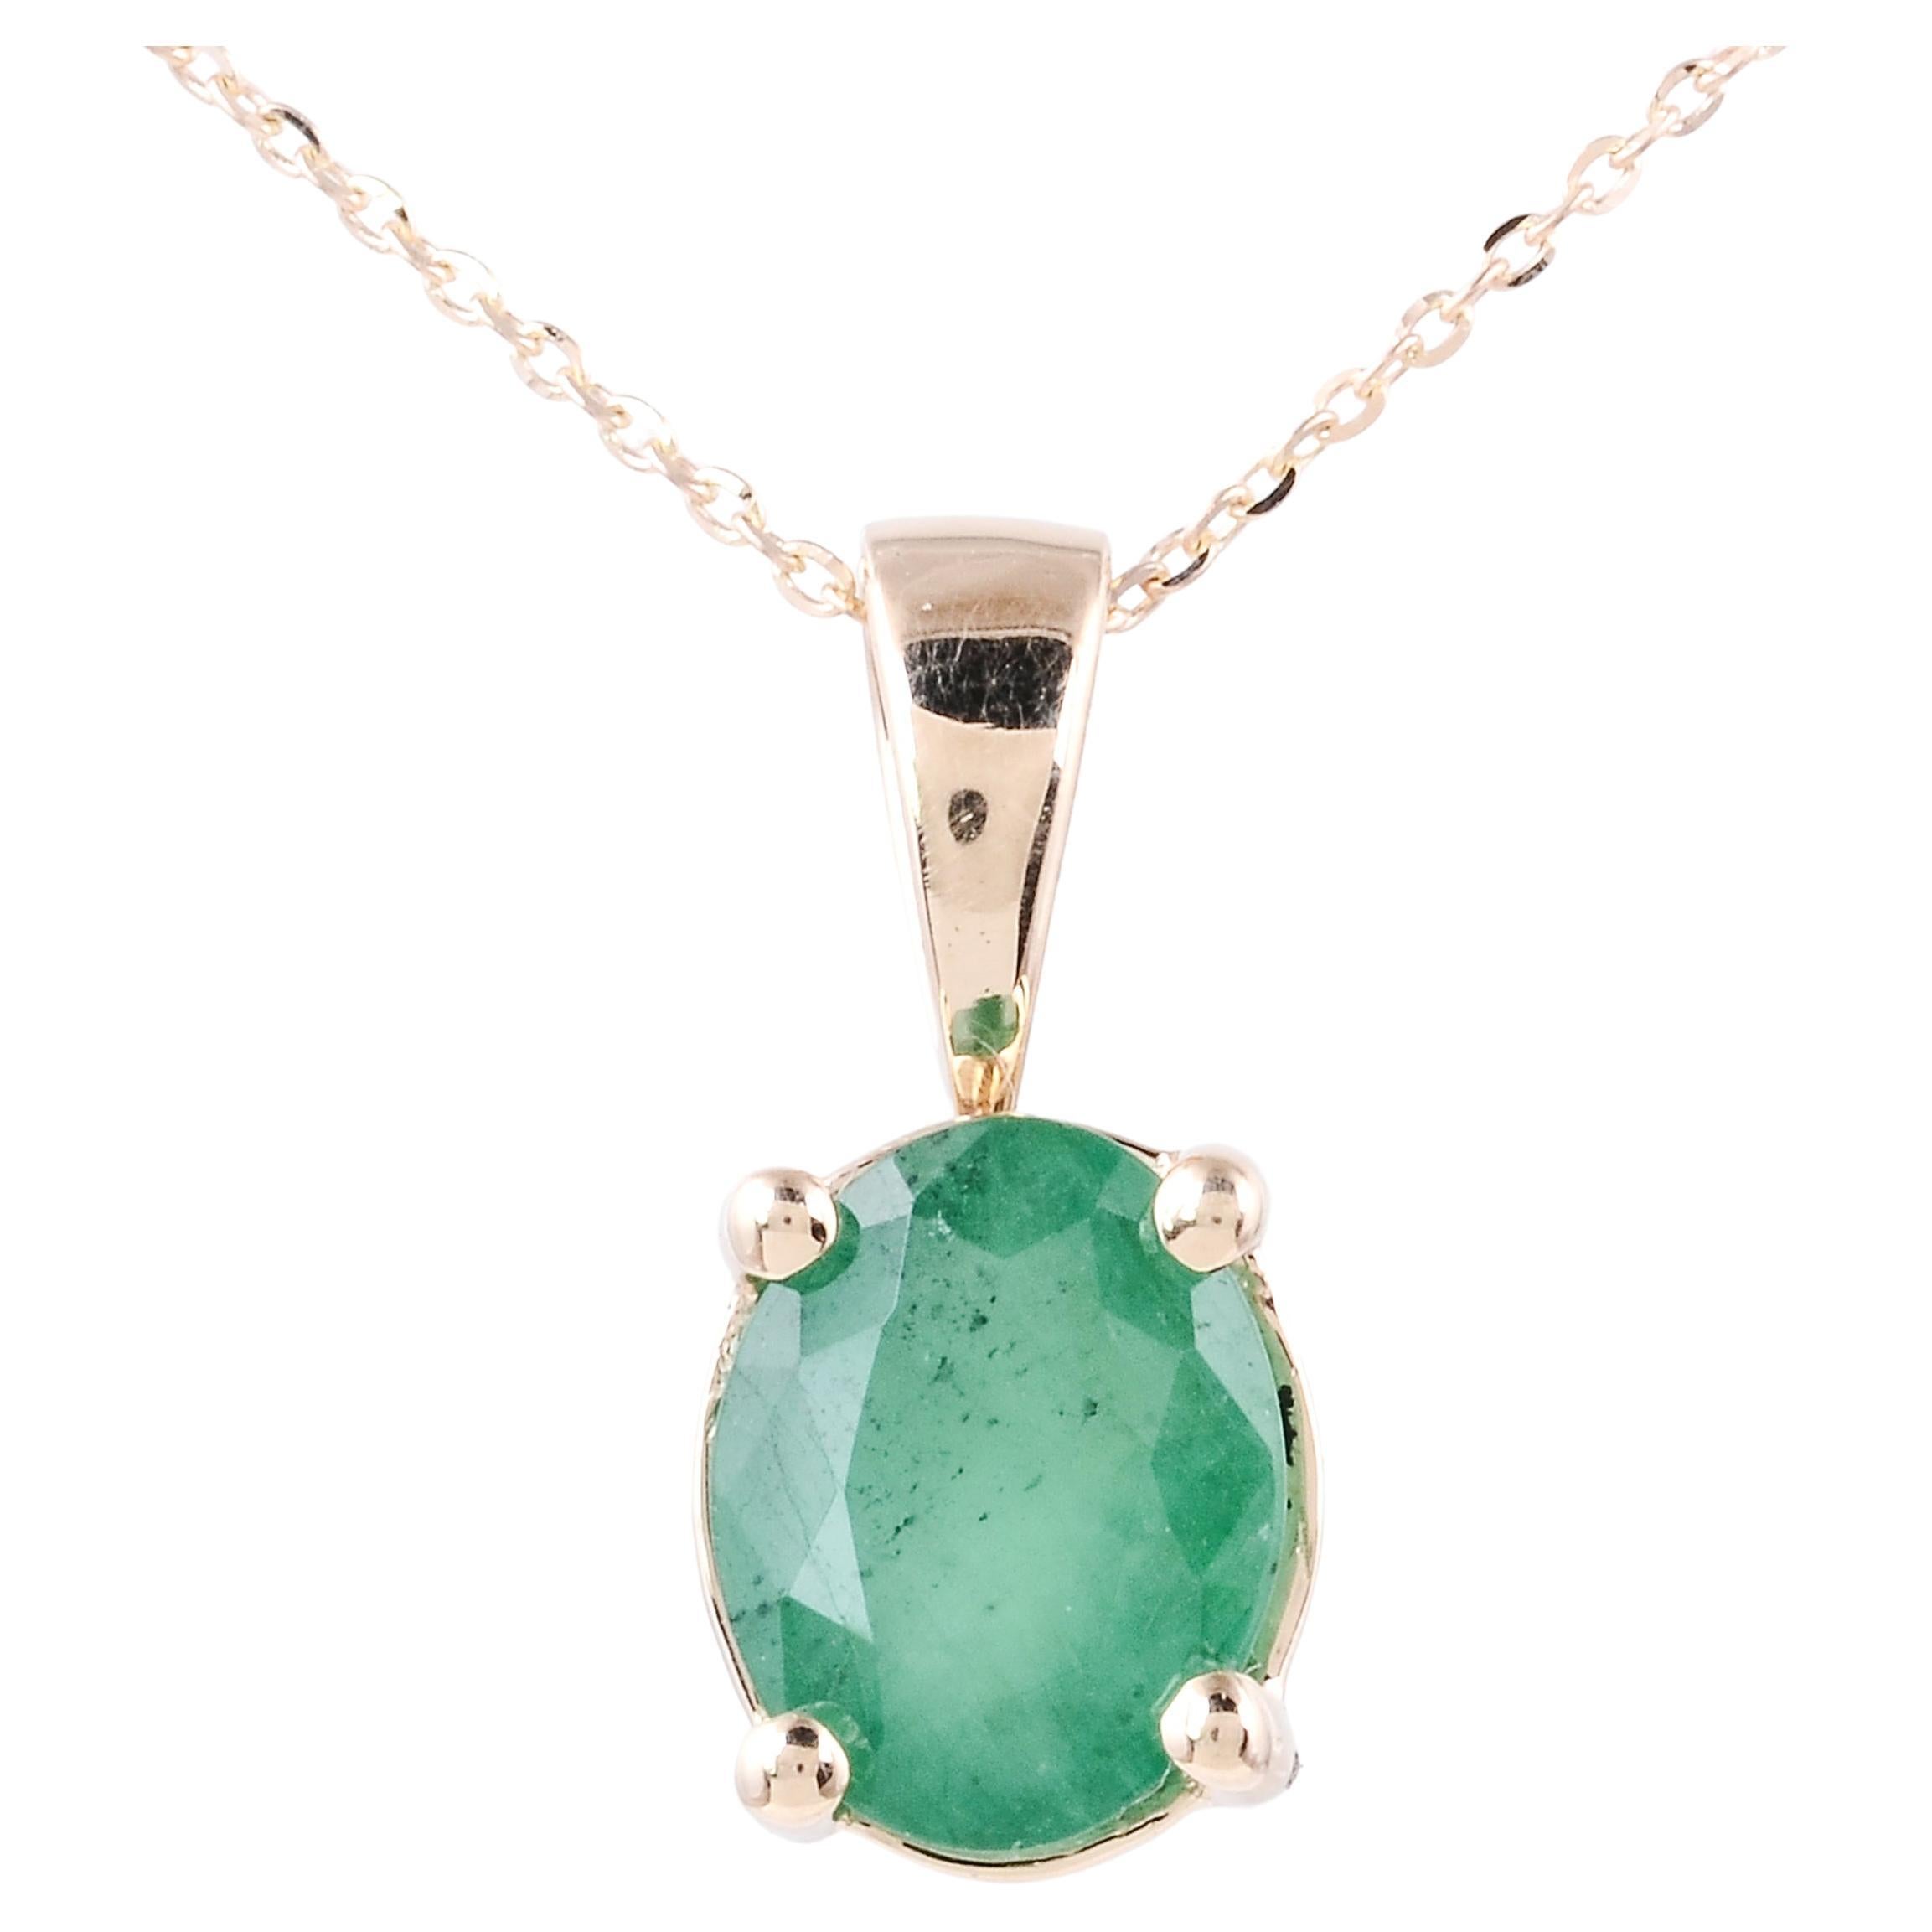 14K Emerald Pendant Necklace 2.33ct - Exquisite Jewelry for Timeless Elegance For Sale